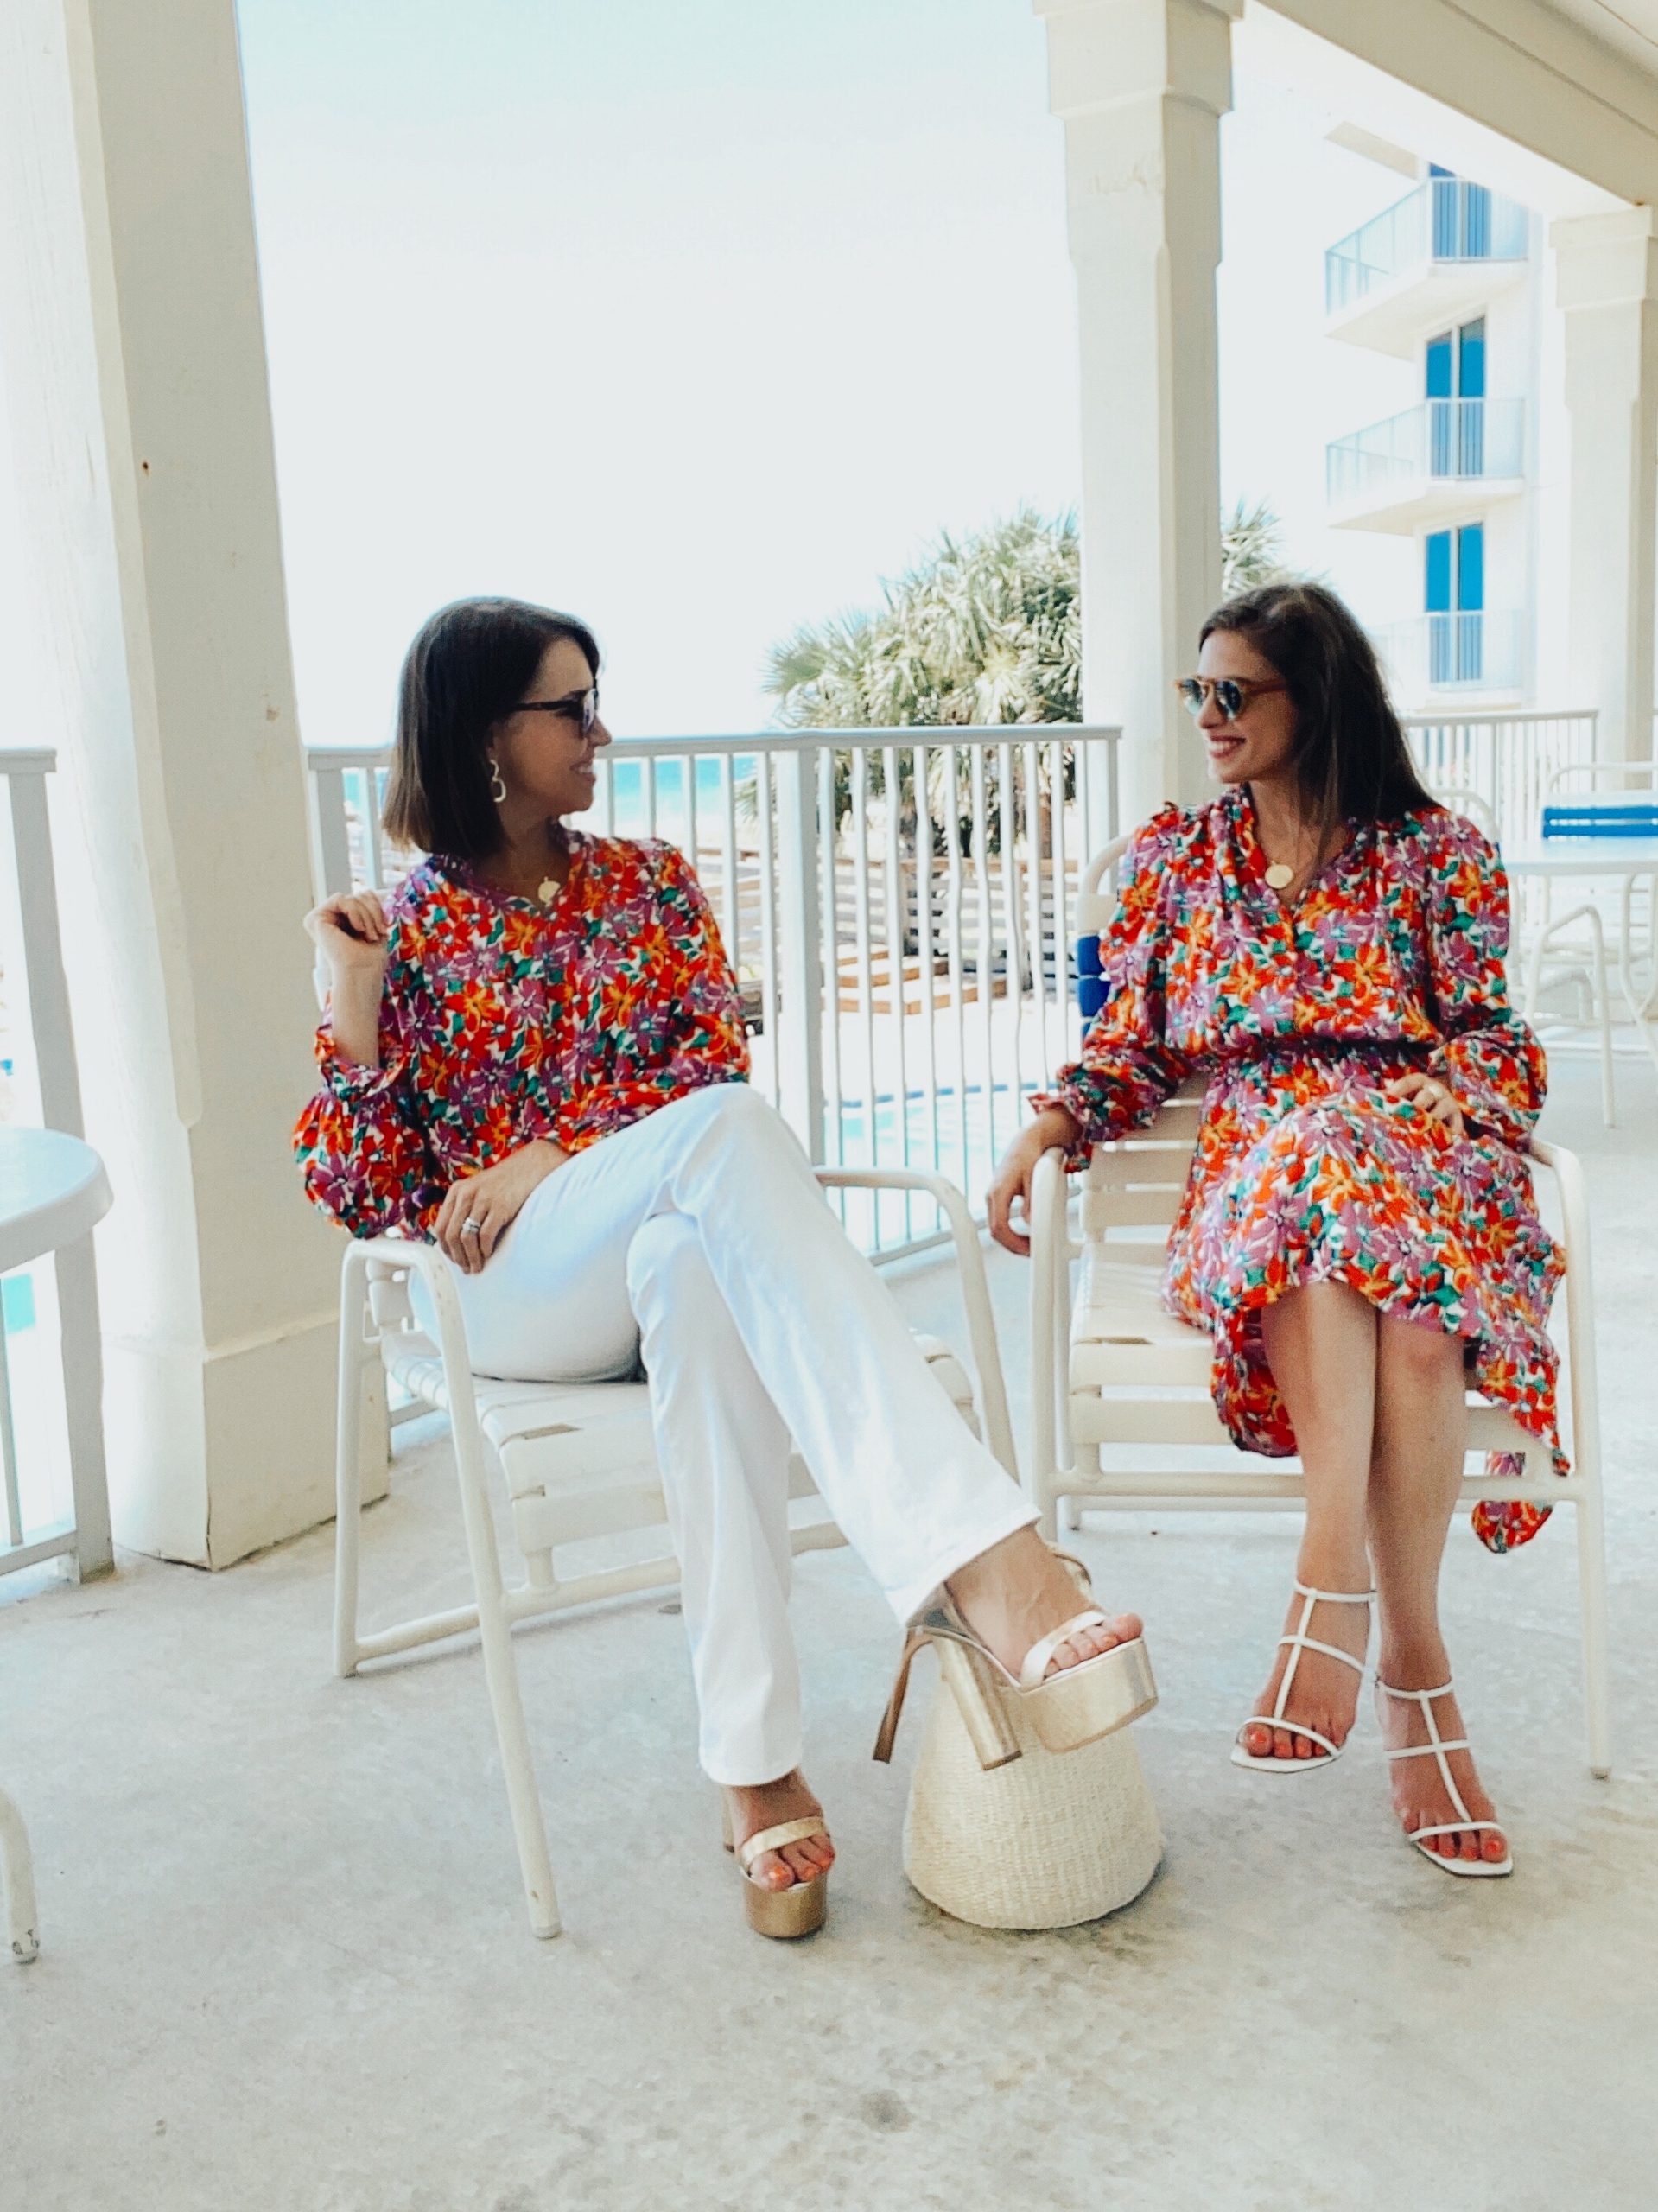 Two women with brown hair wearing bright florals sitting on a deck over looking a pool